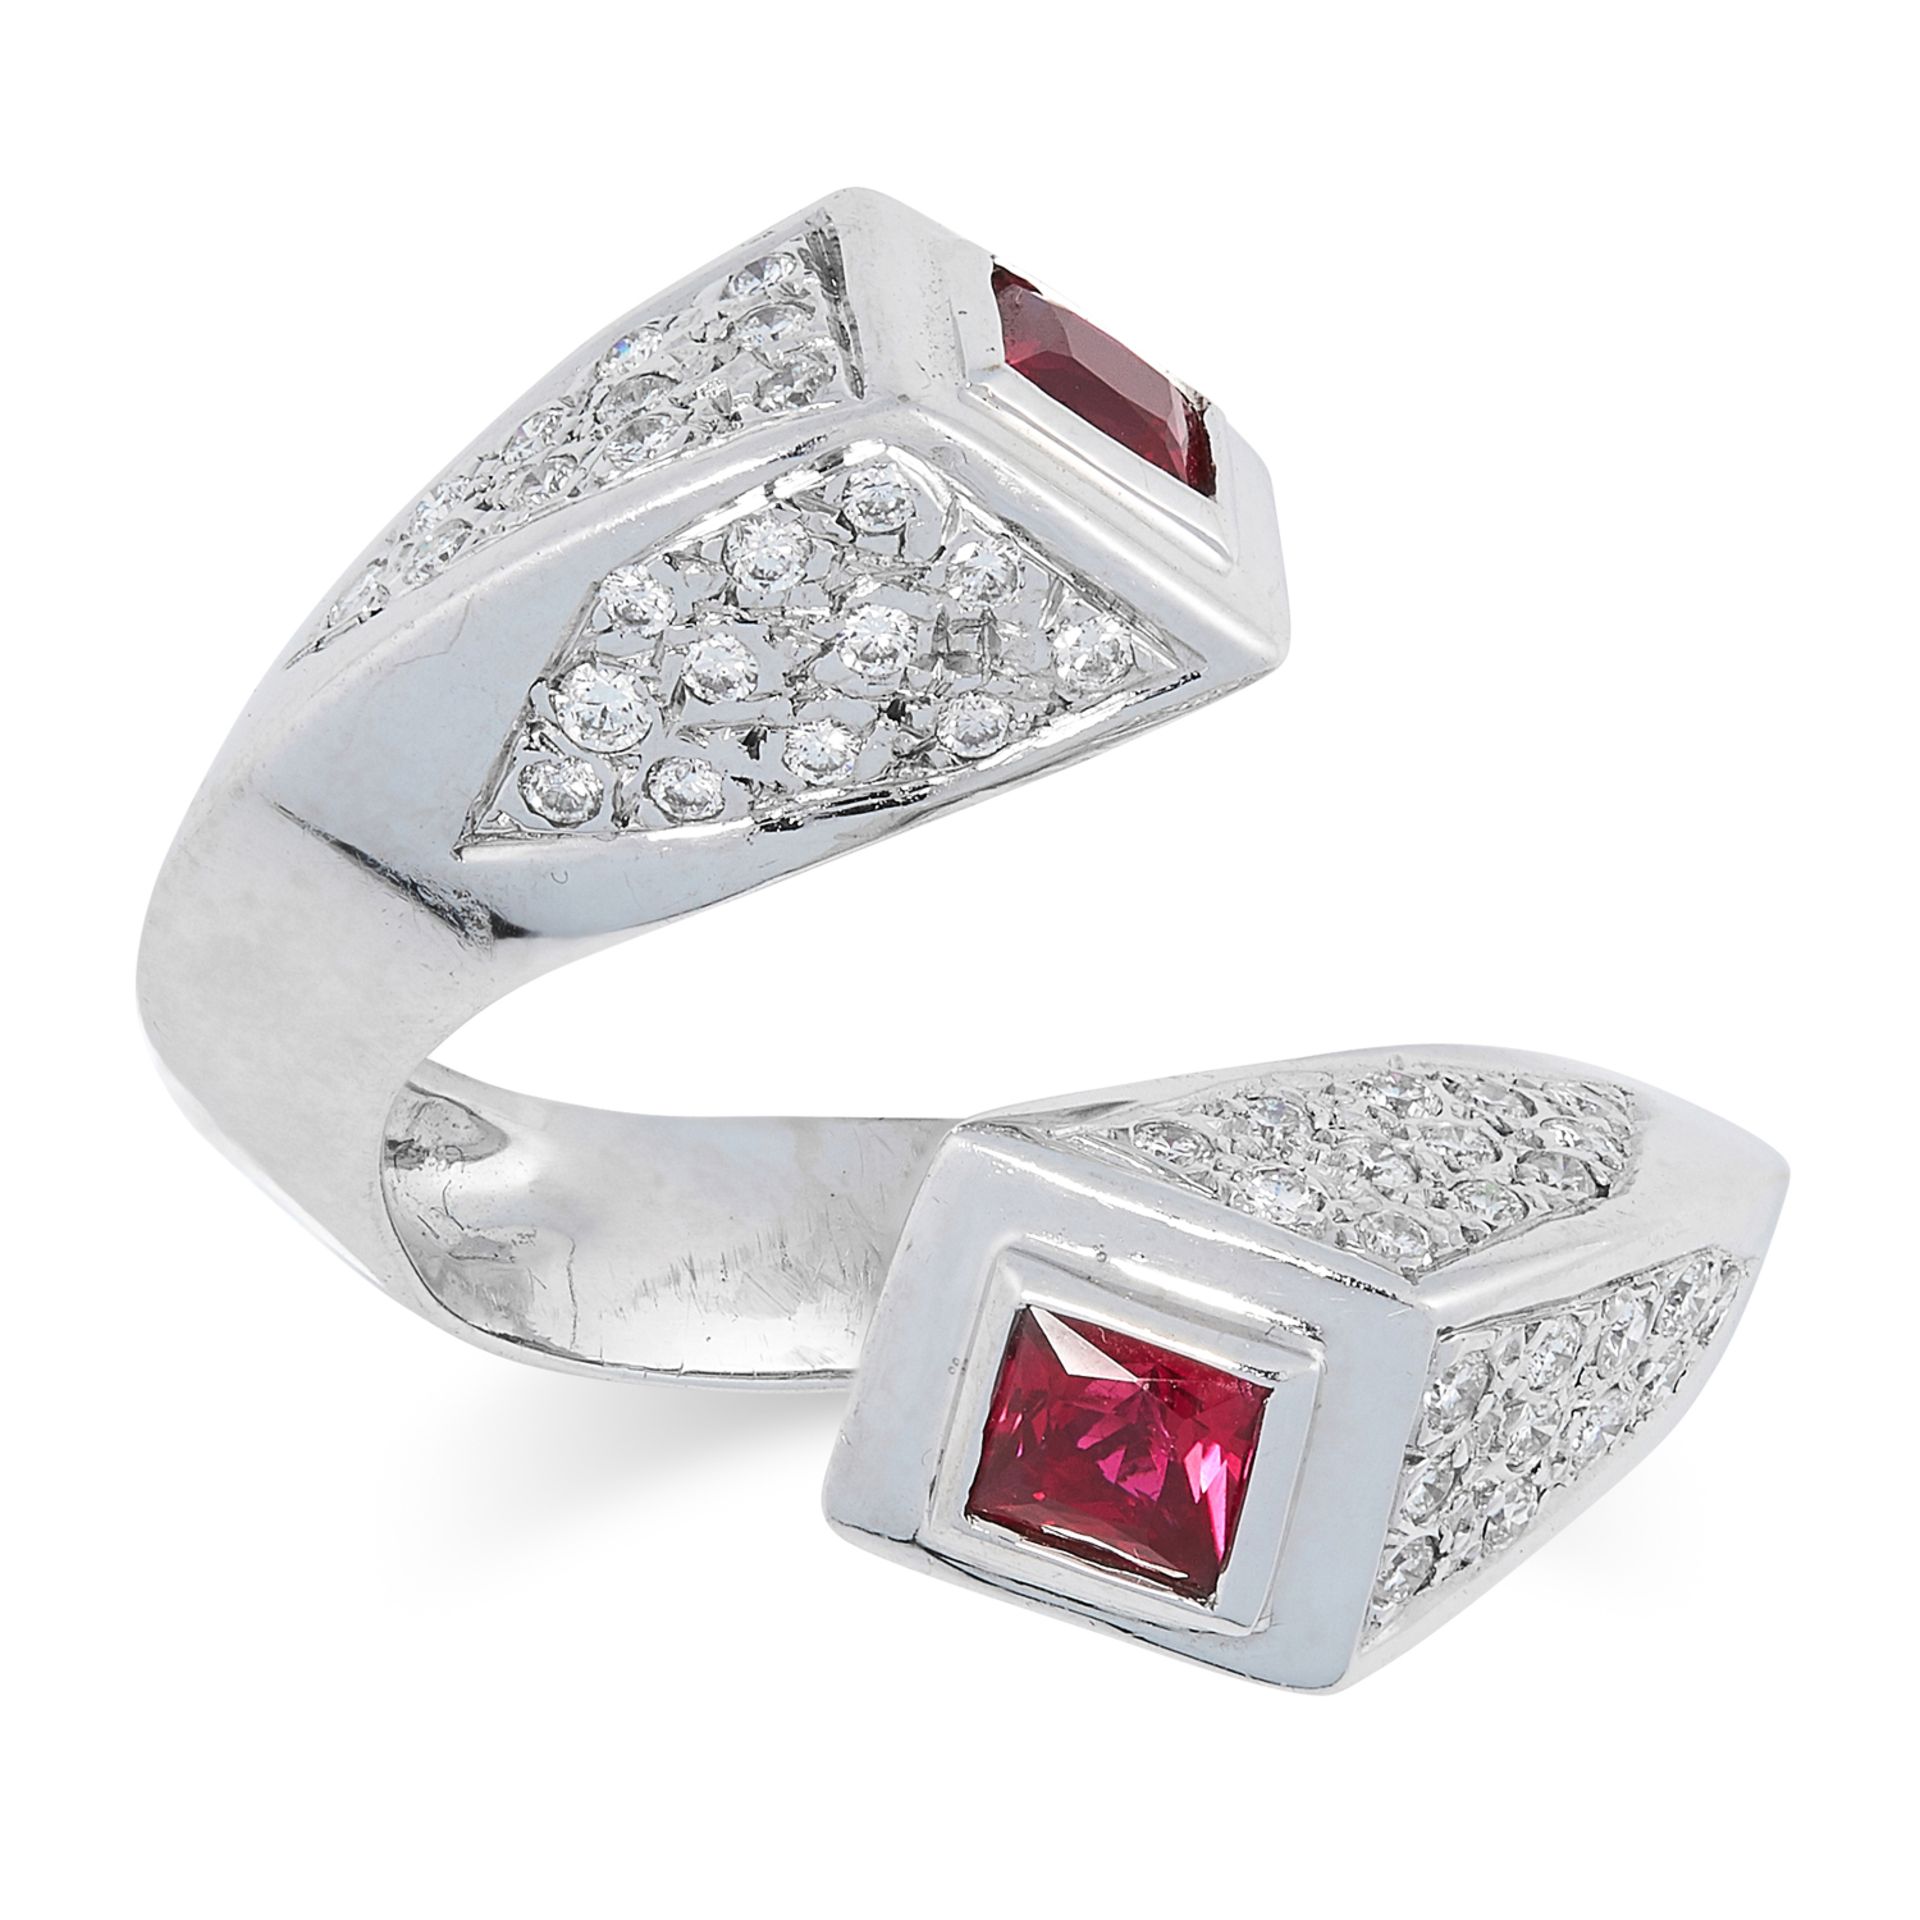 A RUBY AND DIAMOND CROSSOVER RING set with step cut rubies and pave set round brilliant cut